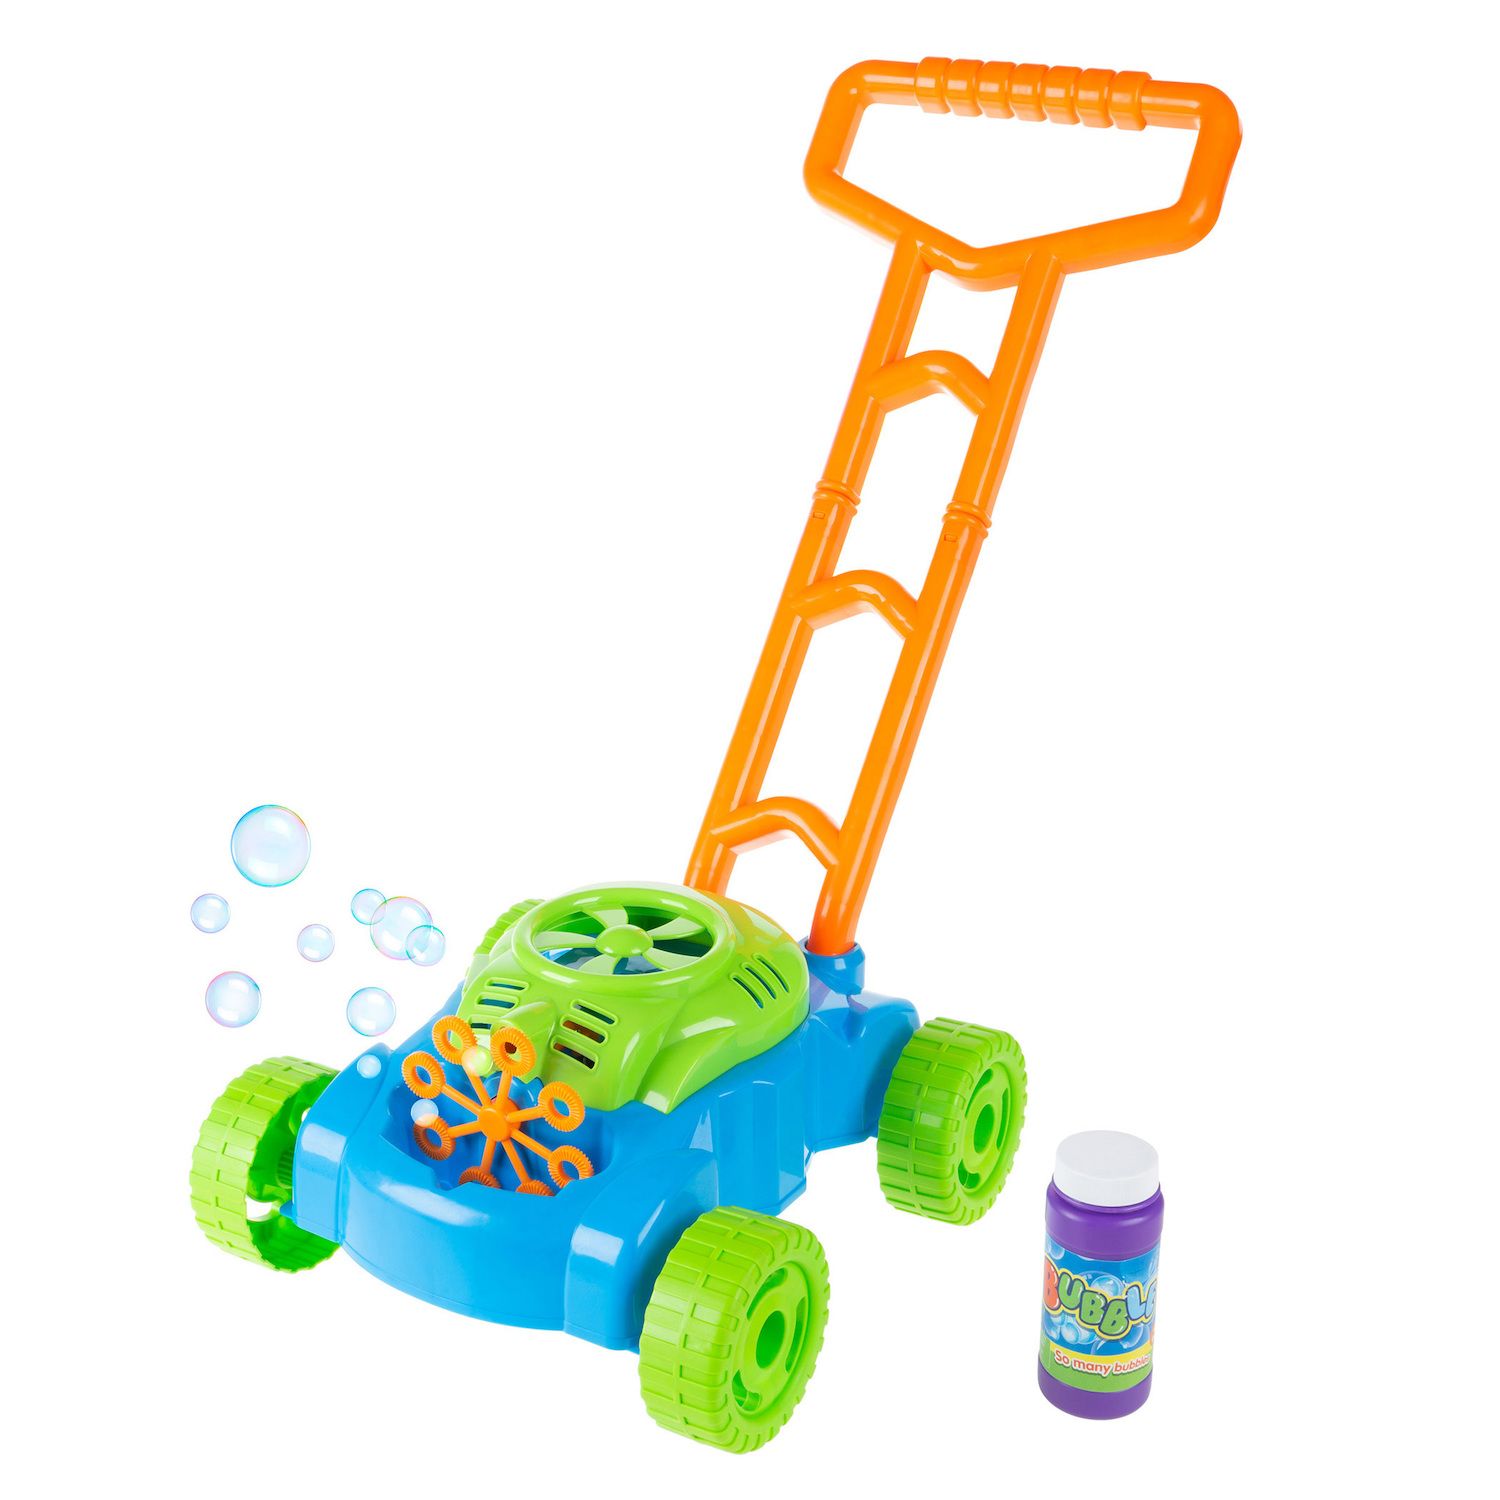 Image for Hey! Play! Toy Push Bubble Lawn Mower at Kohl's.